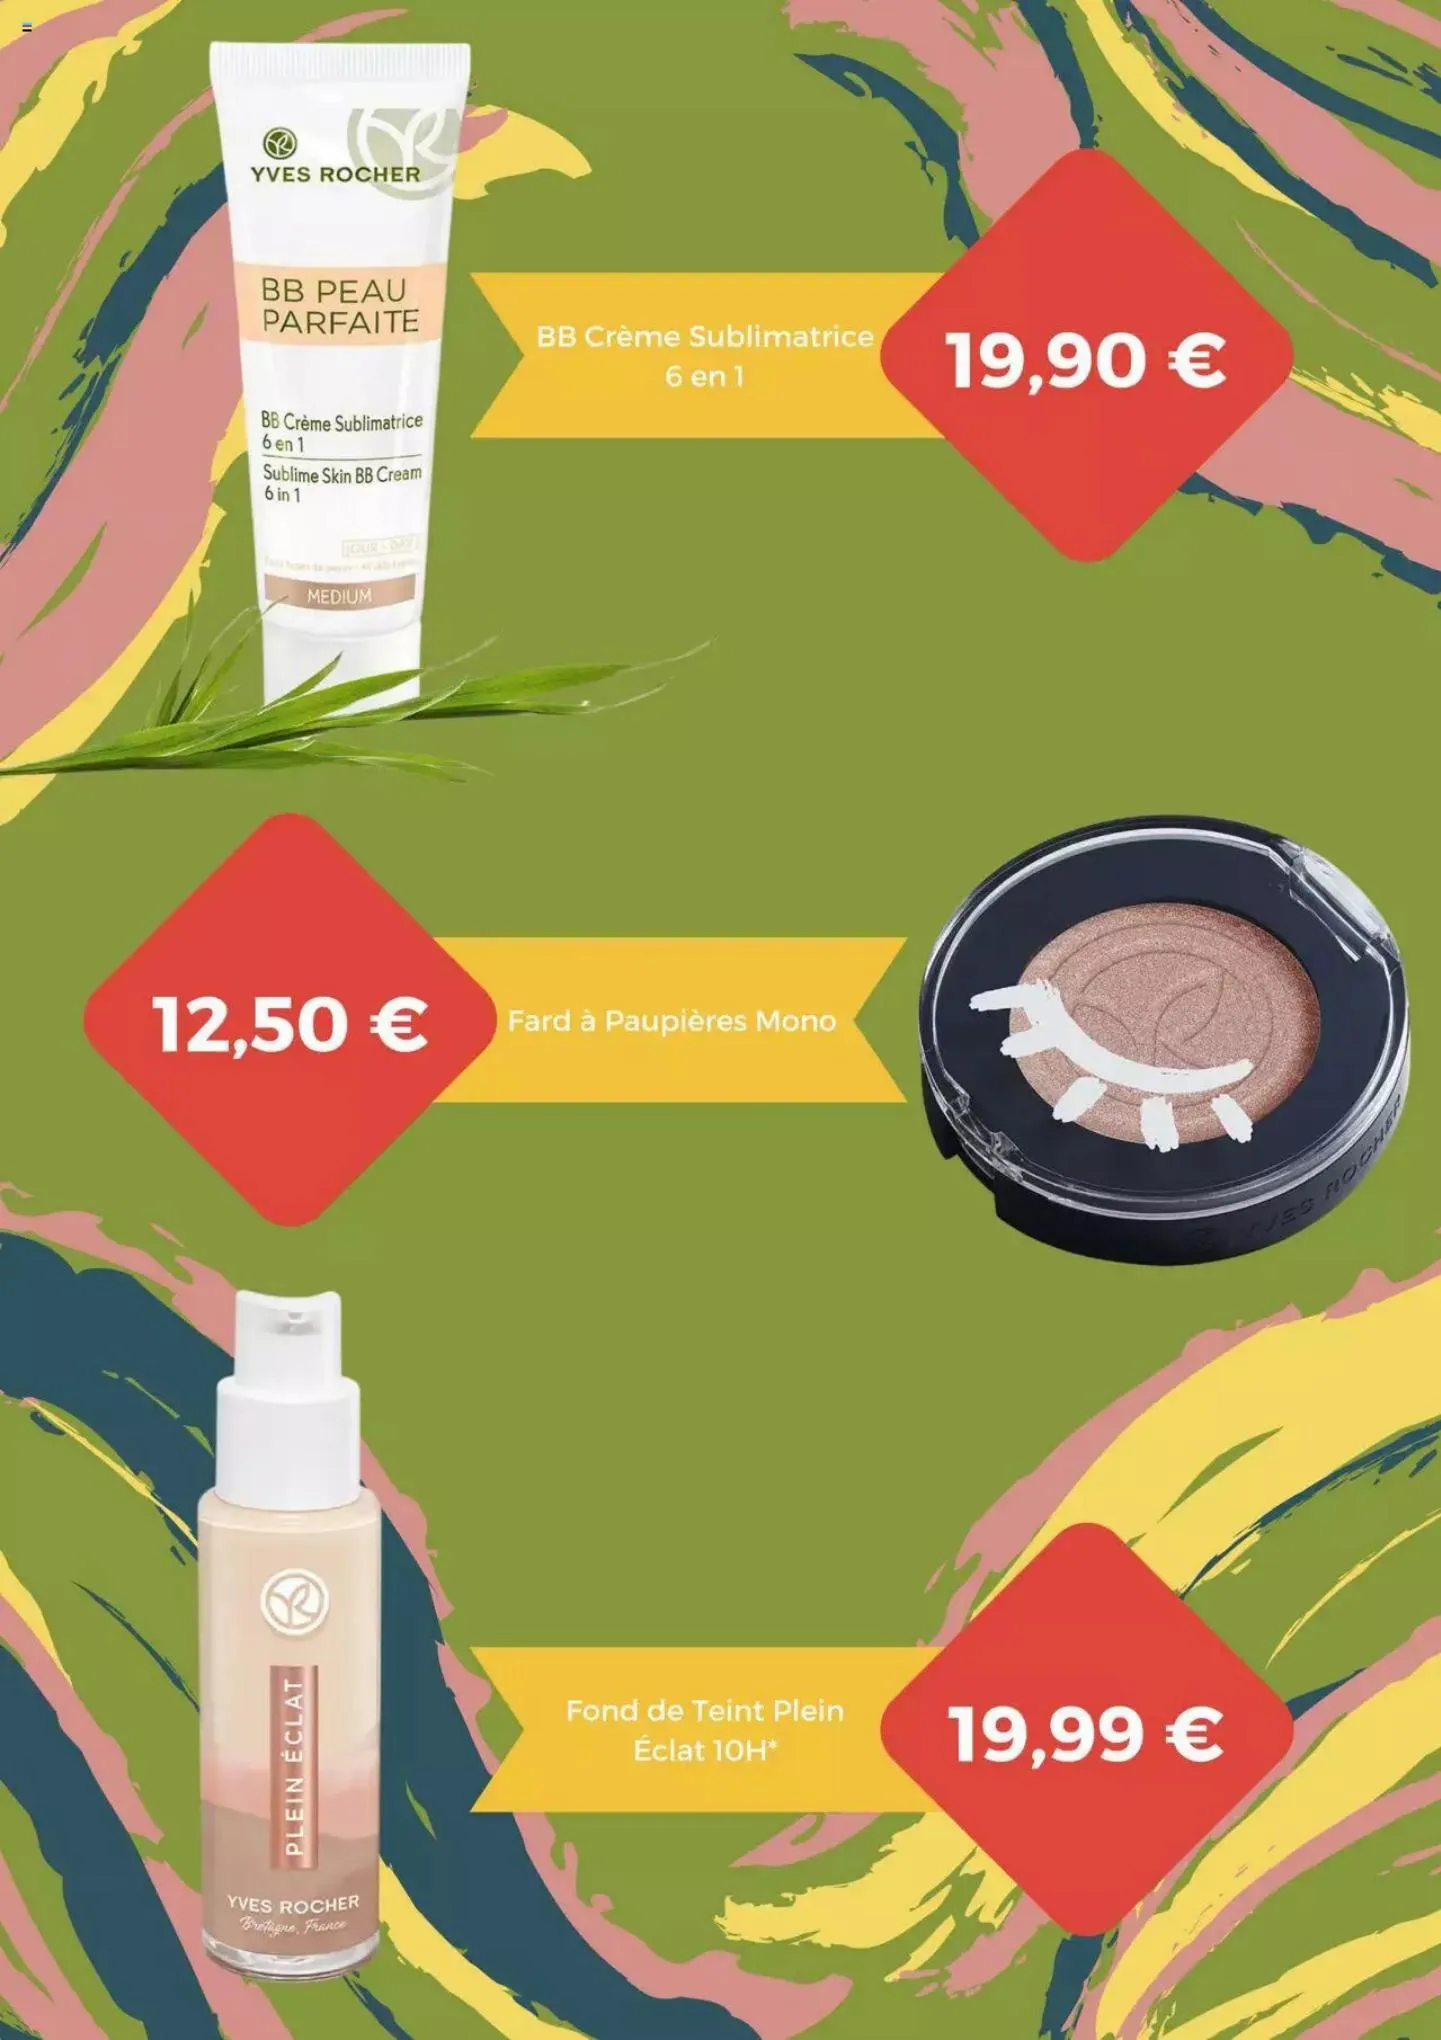 Catalogue Maquillage Yves Rocher, page 00006